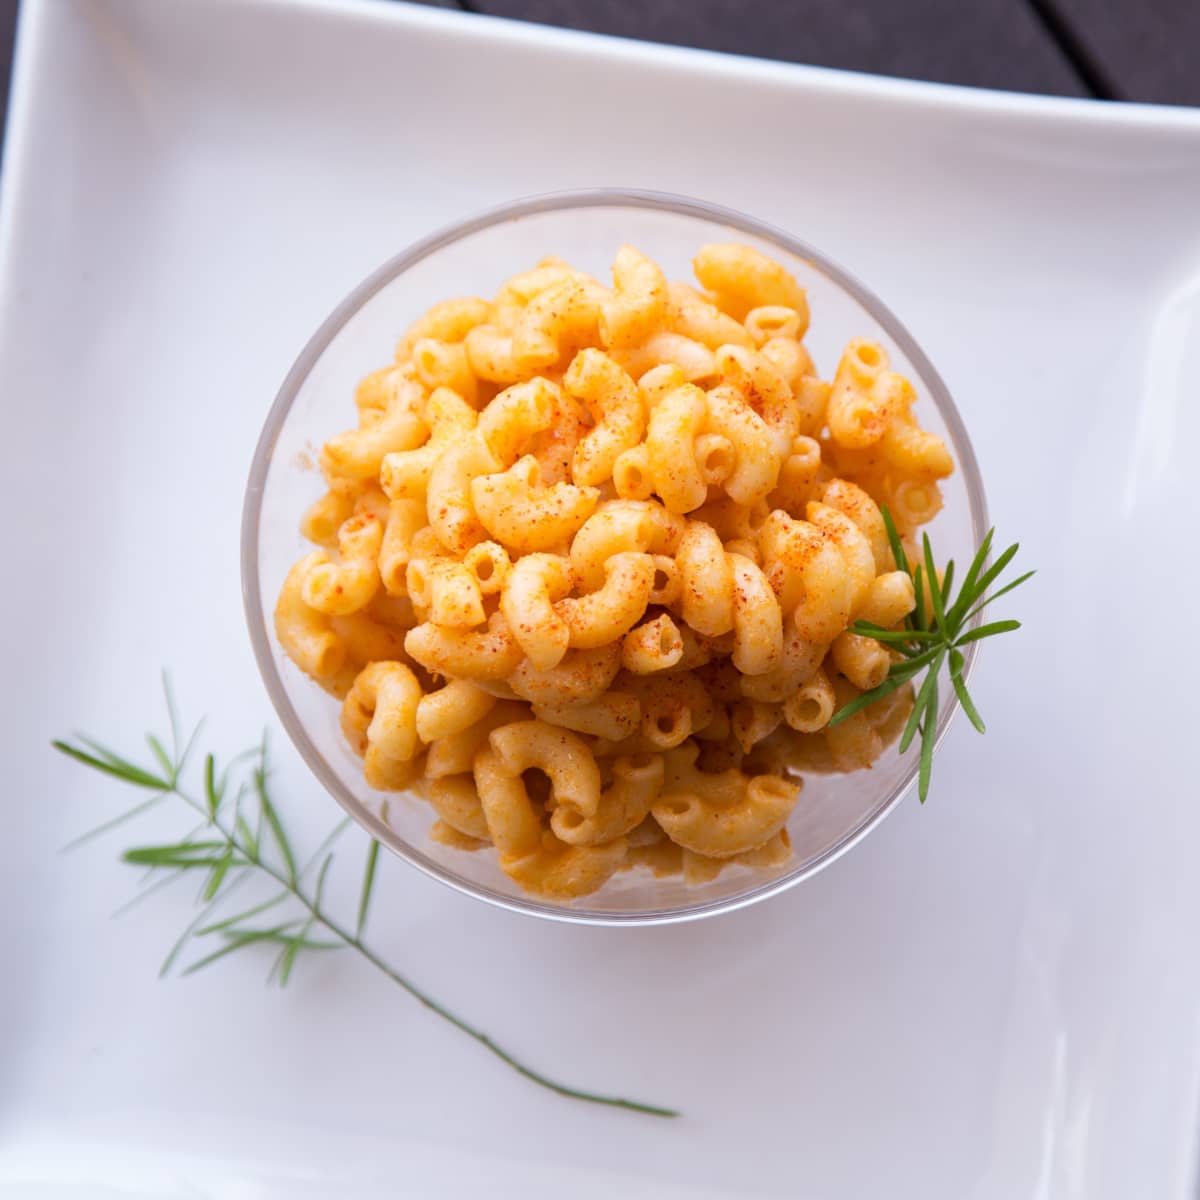 The Viral Hack for Making the Best Kraft Mac & Cheese